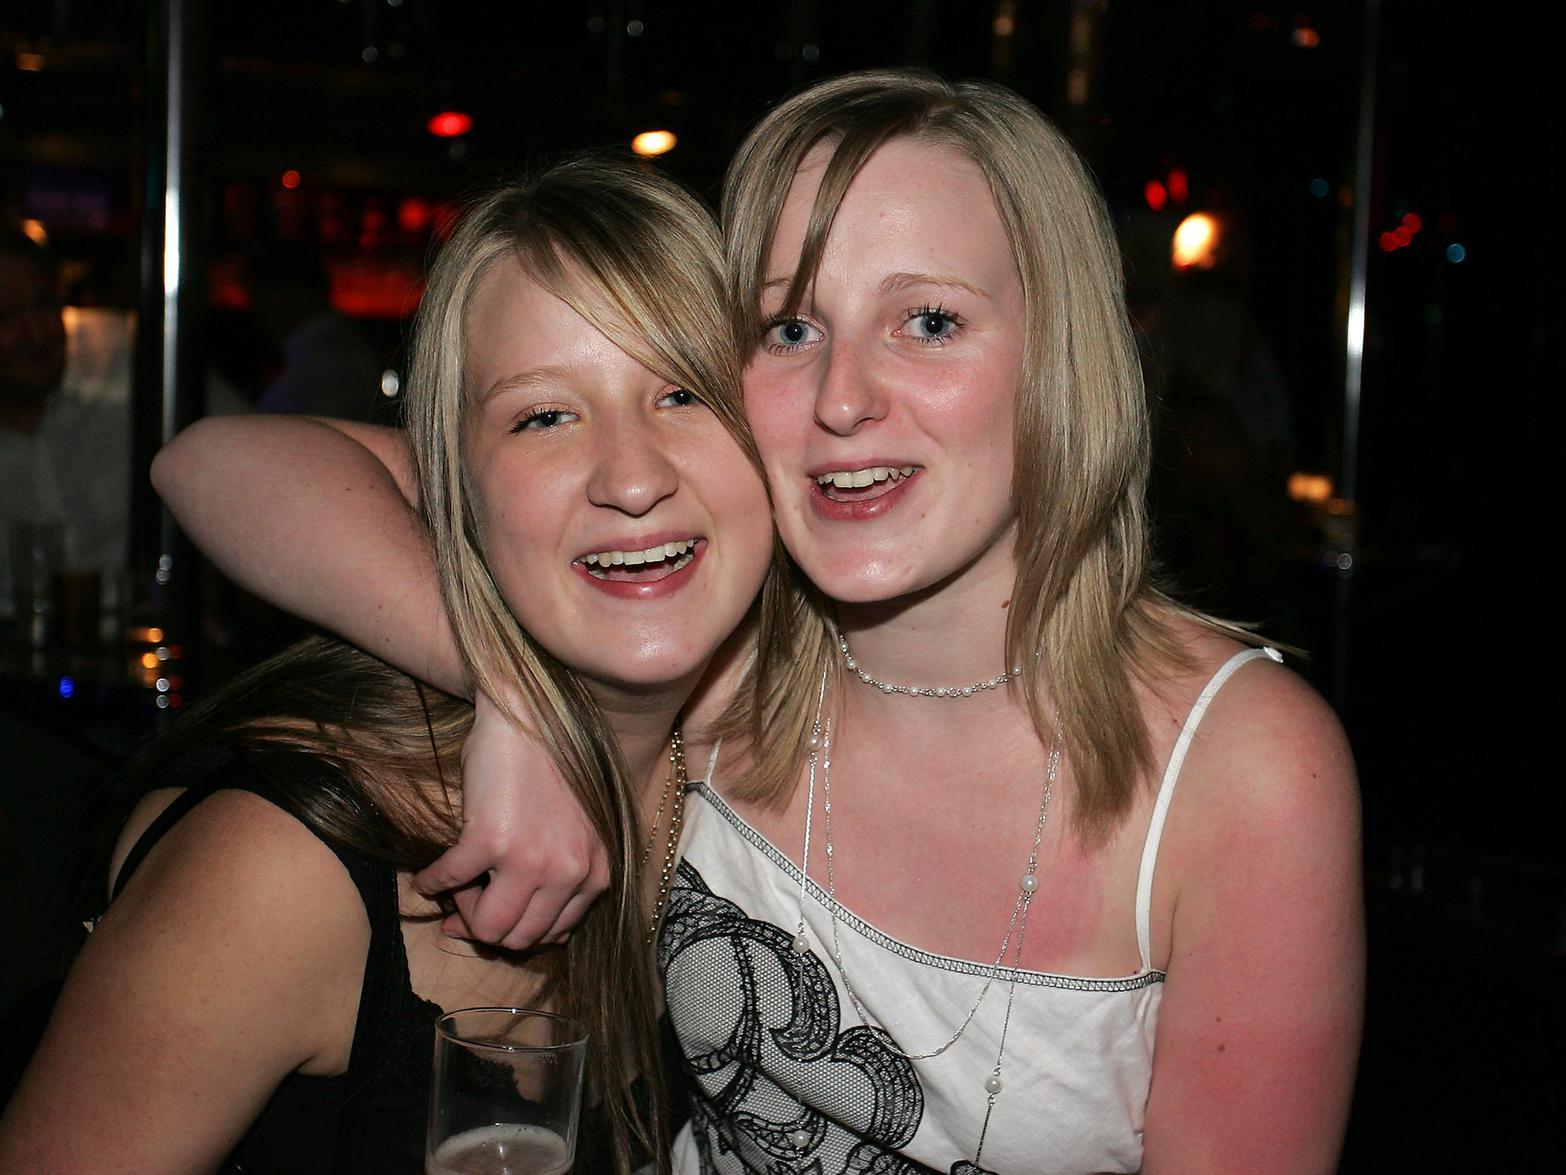 Friends Sarah Berry and Becky Fortis enjoy a girly night out.